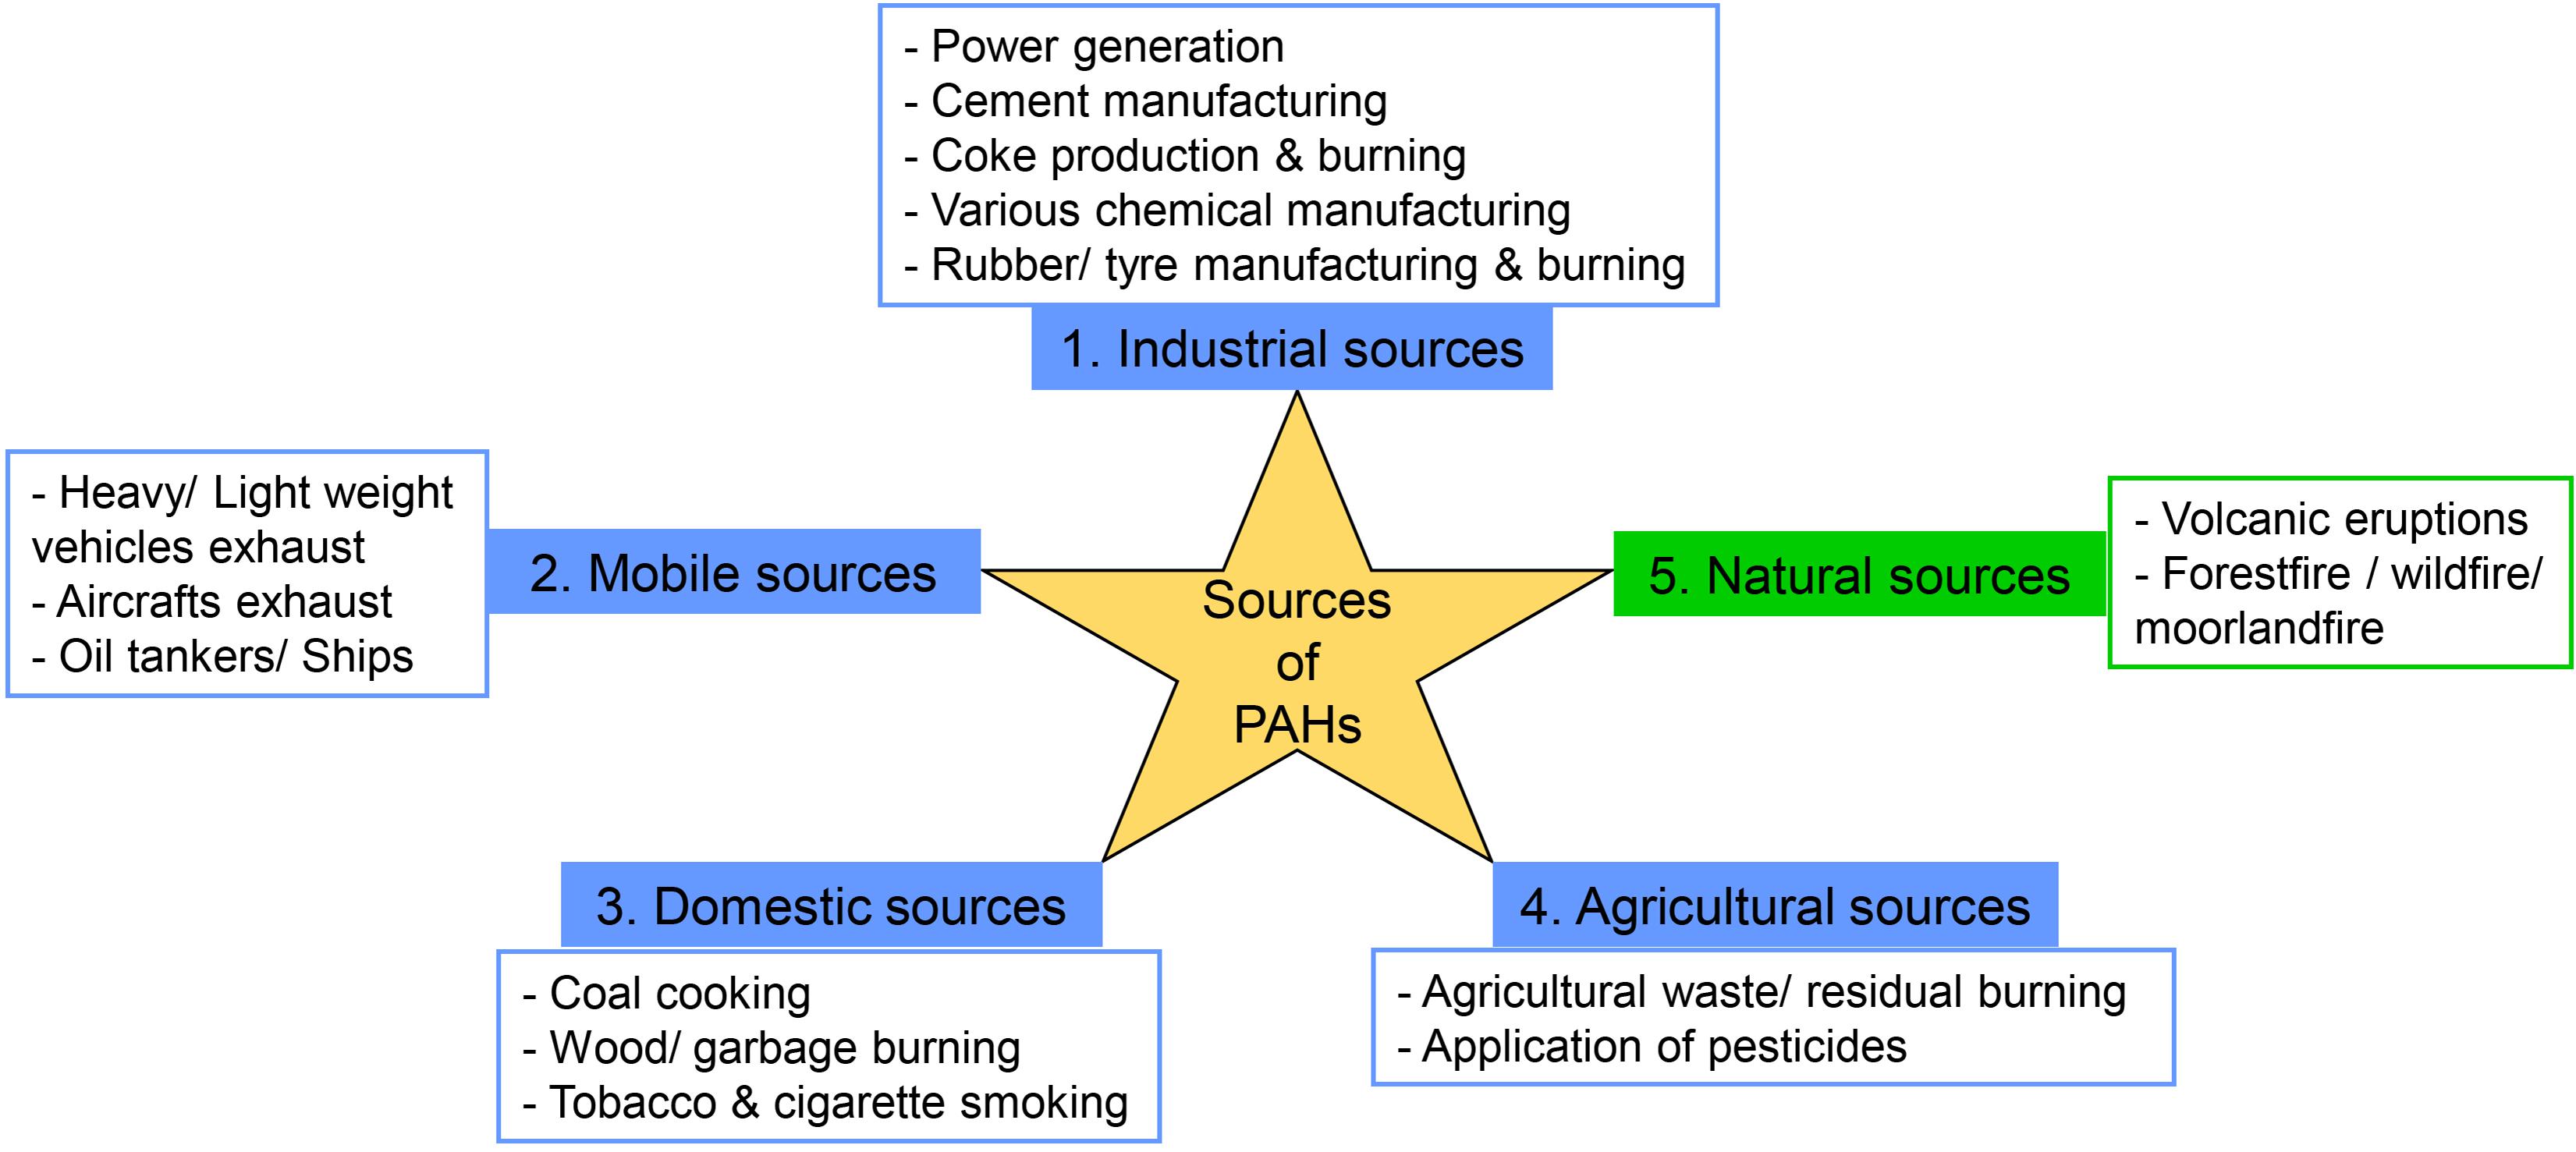 Toxicity pathways. Toxicity pathways describe the processes by